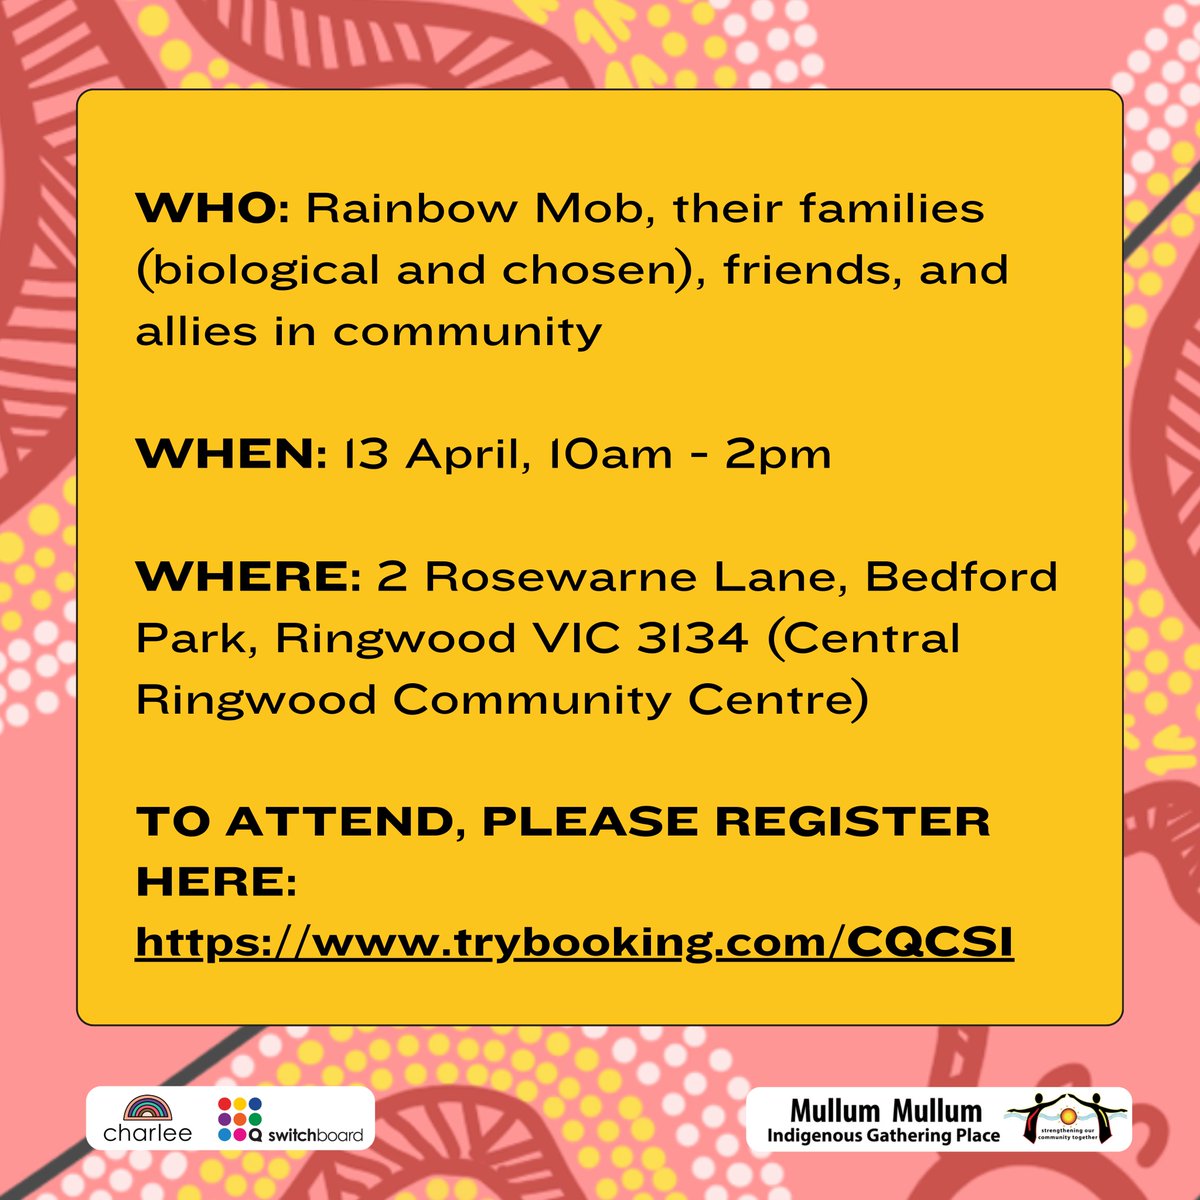 Charlee, @switchboard_vic and @mmigp are throwing a Rainbow Mob Family Day! Calling all rainbow mob and their families (biological and chosen) to head to CRCC Ringwood on April 13 for stalls, yarning, sausage sizzle and giveaways - spread the word! trybooking.com/CQCSI